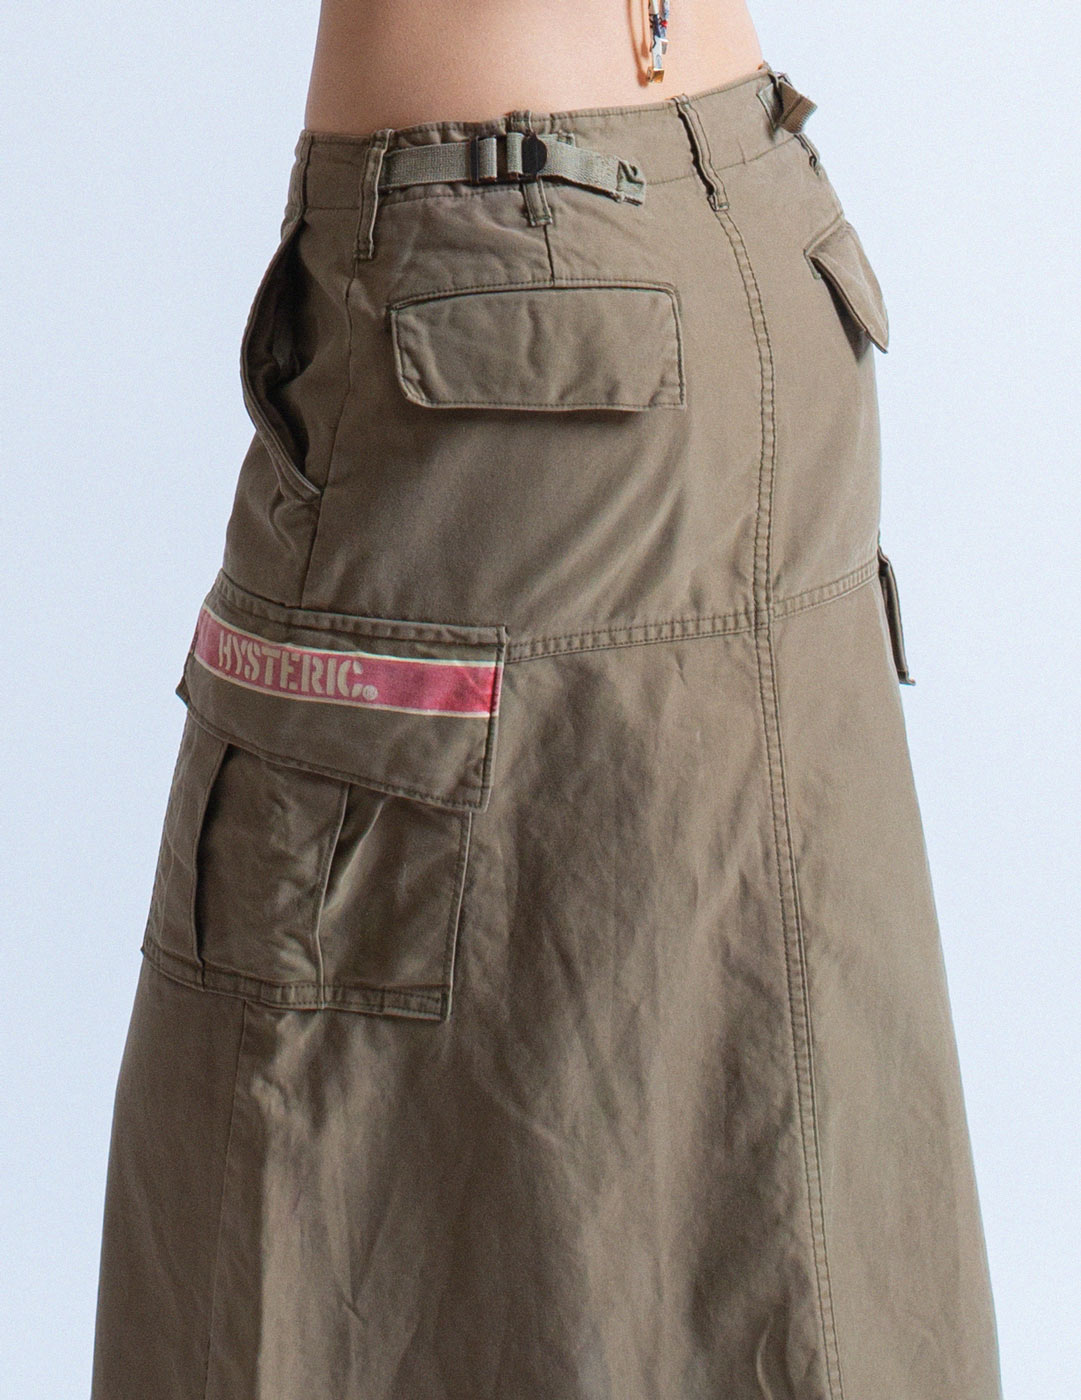 Hysteric Glamour vintage cargo maxi skirt back detail